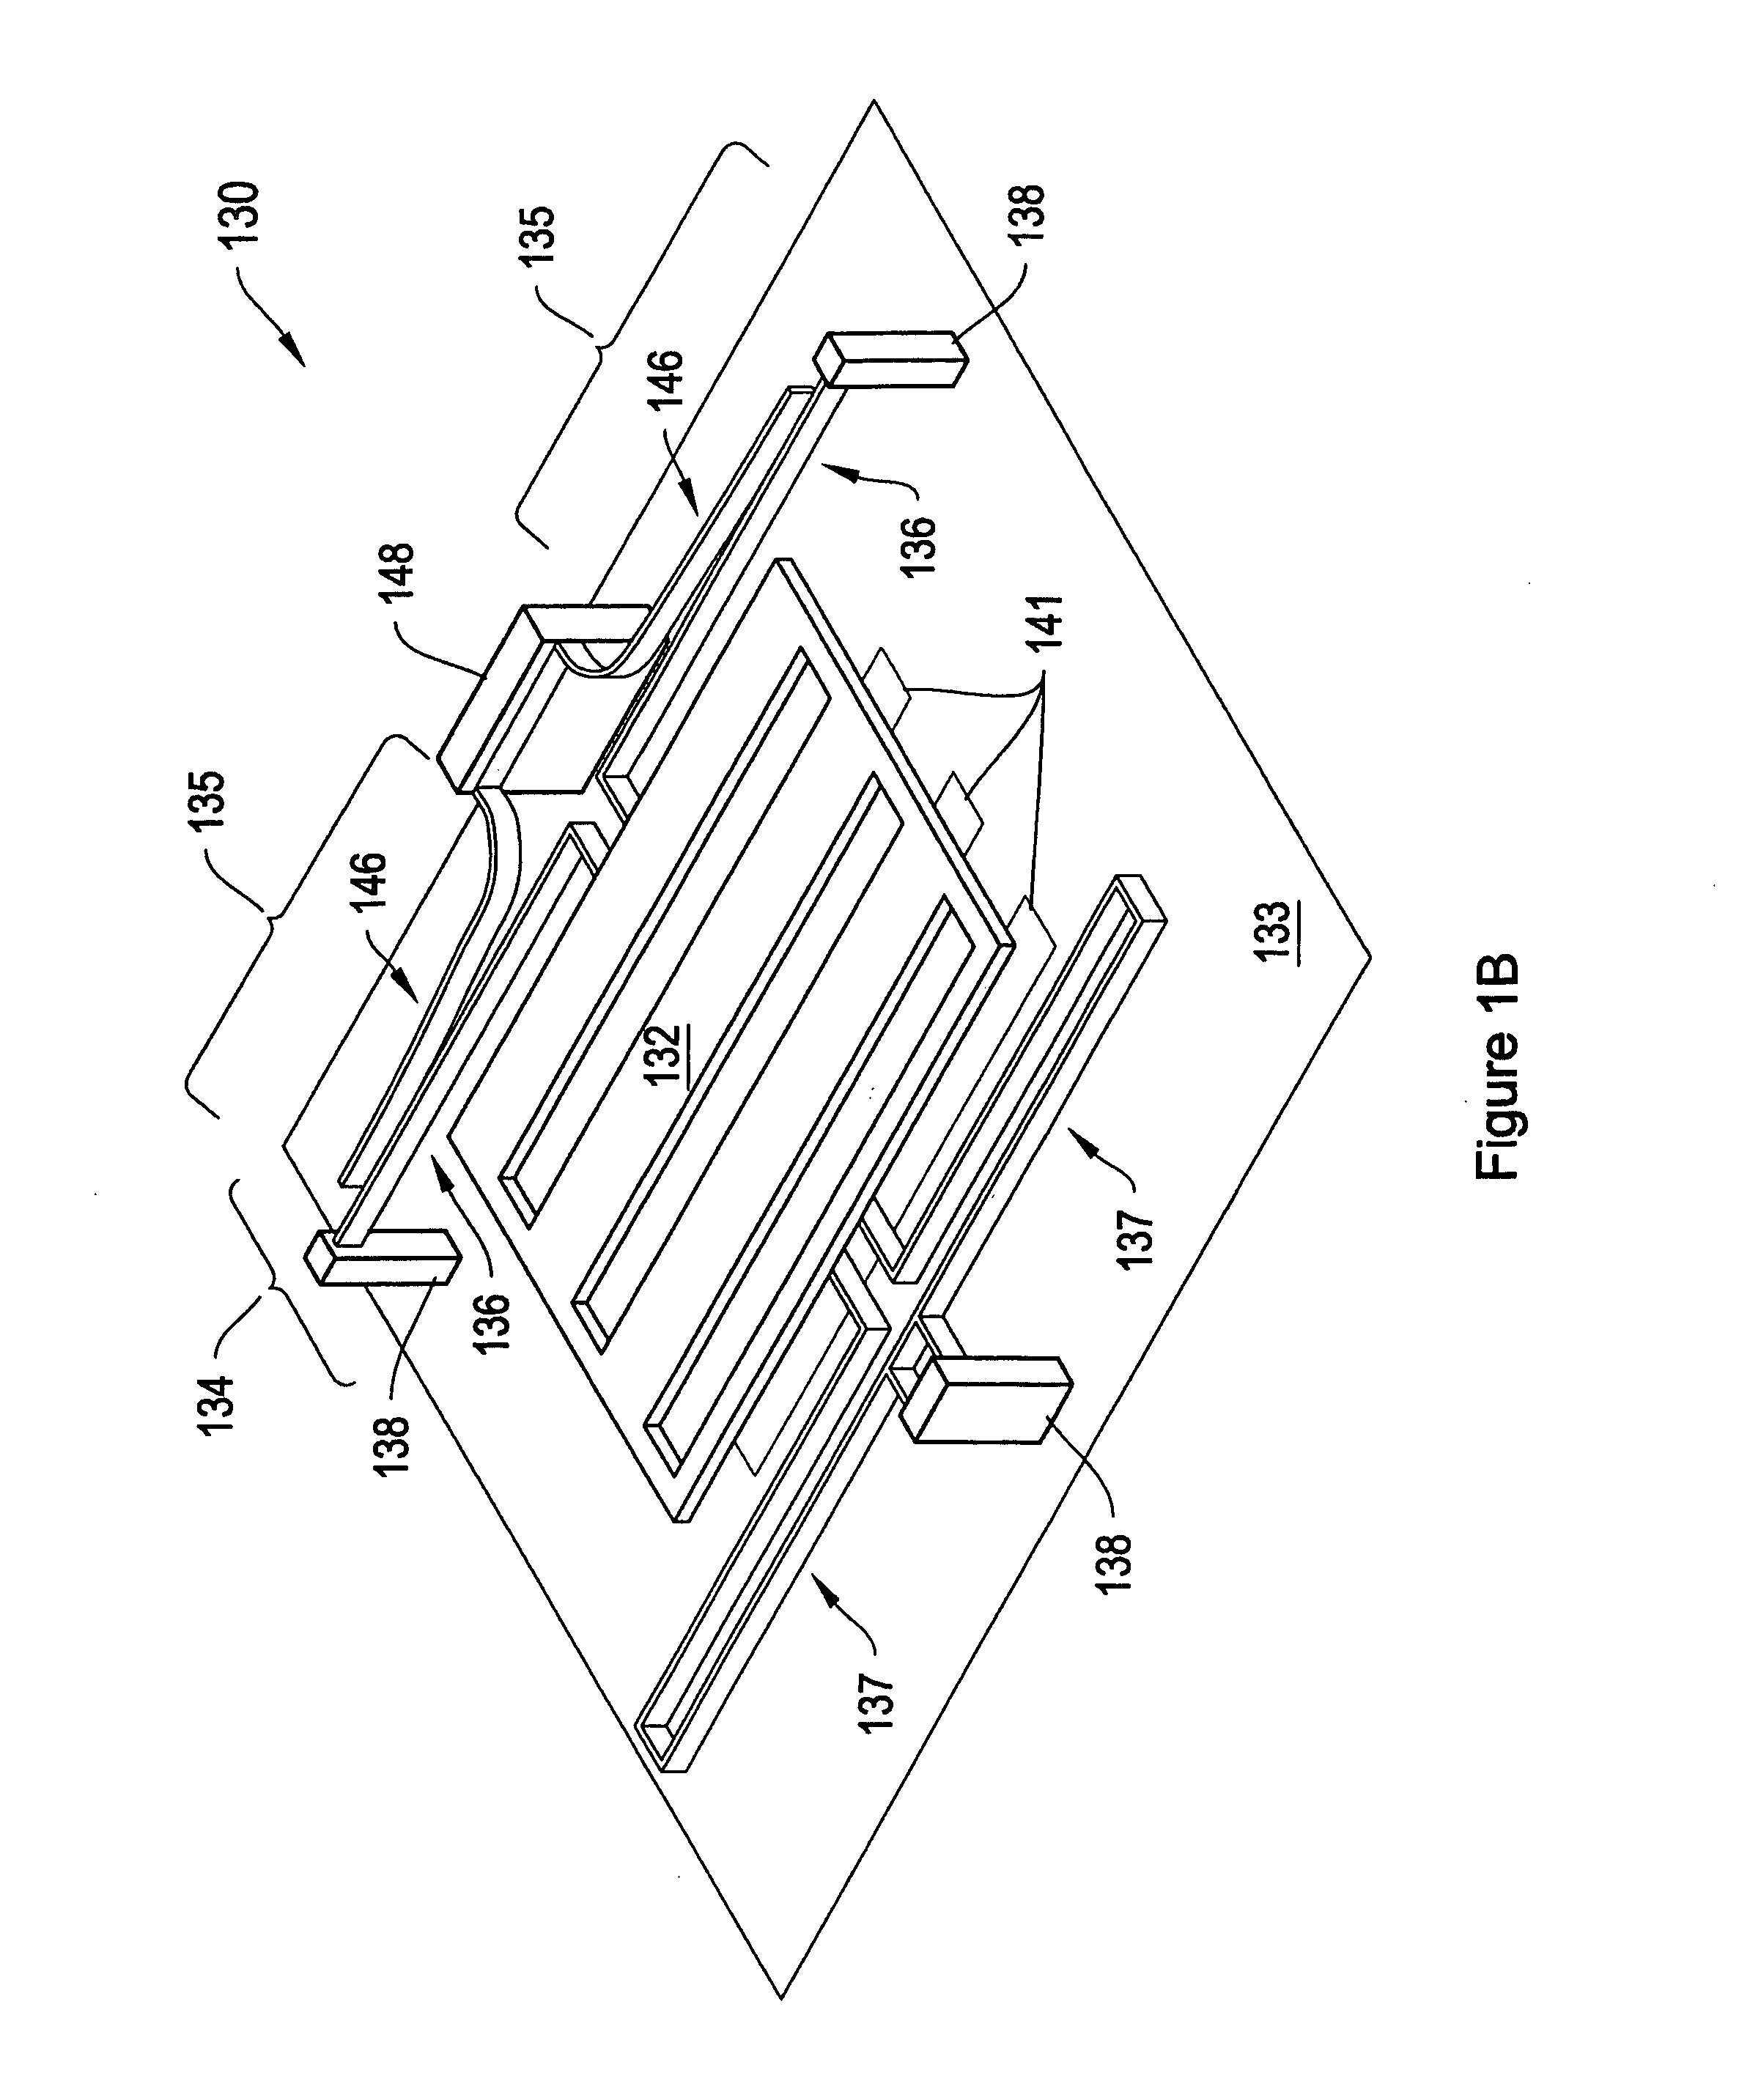 Display apparatus and methods for manufacture thereof